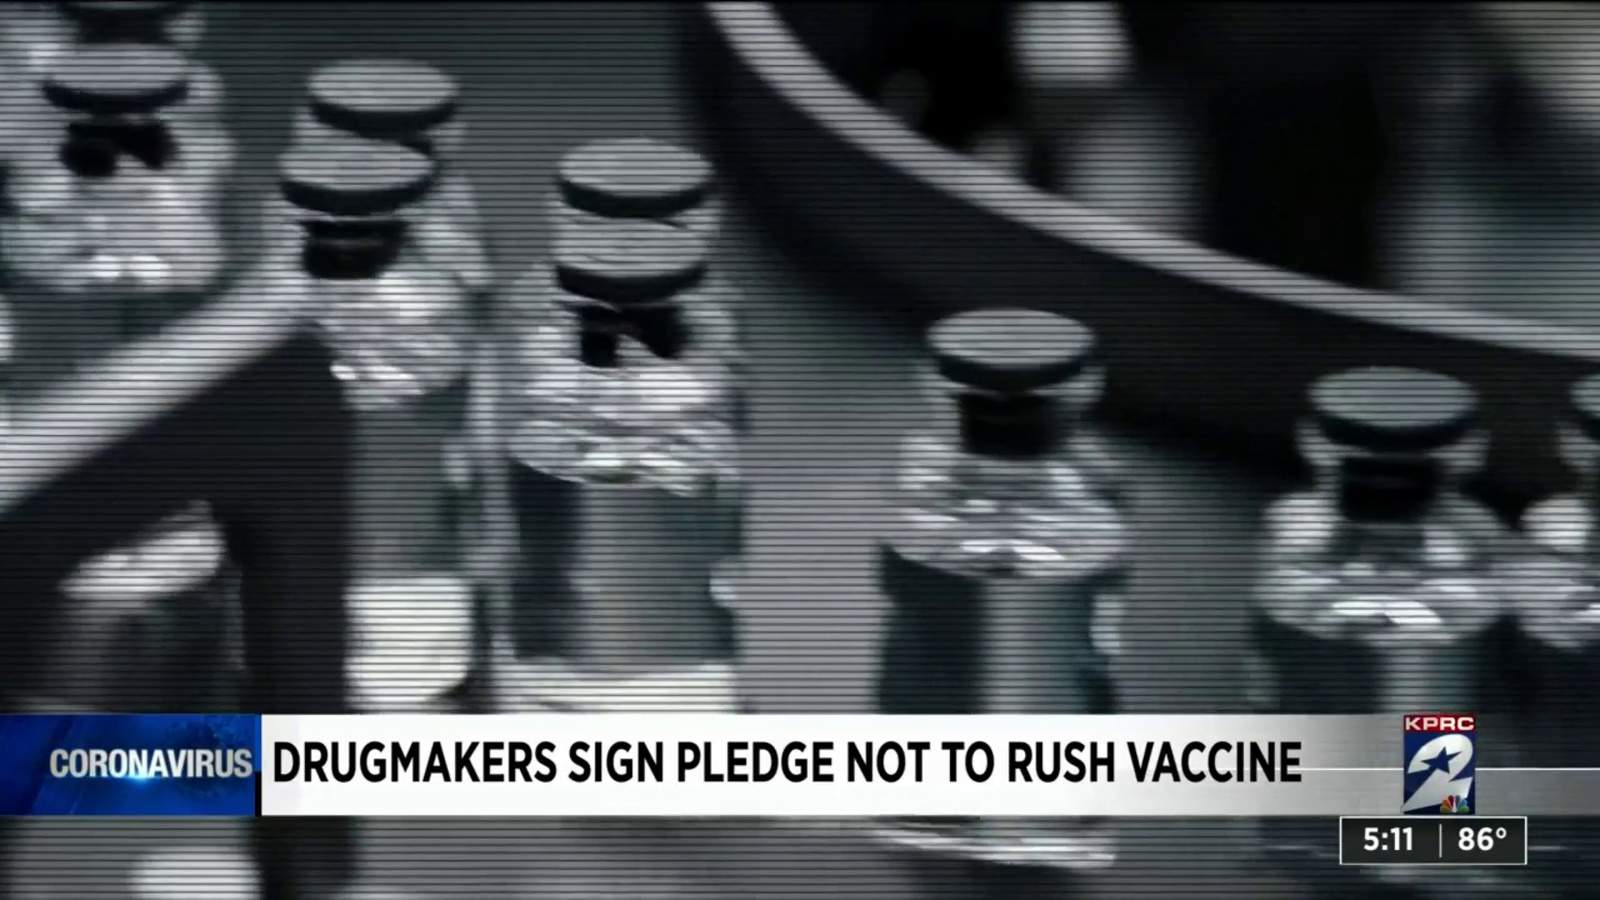 Top execs of 9 companies testing coronavirus vaccines sign pledge to focus on safety, high standards